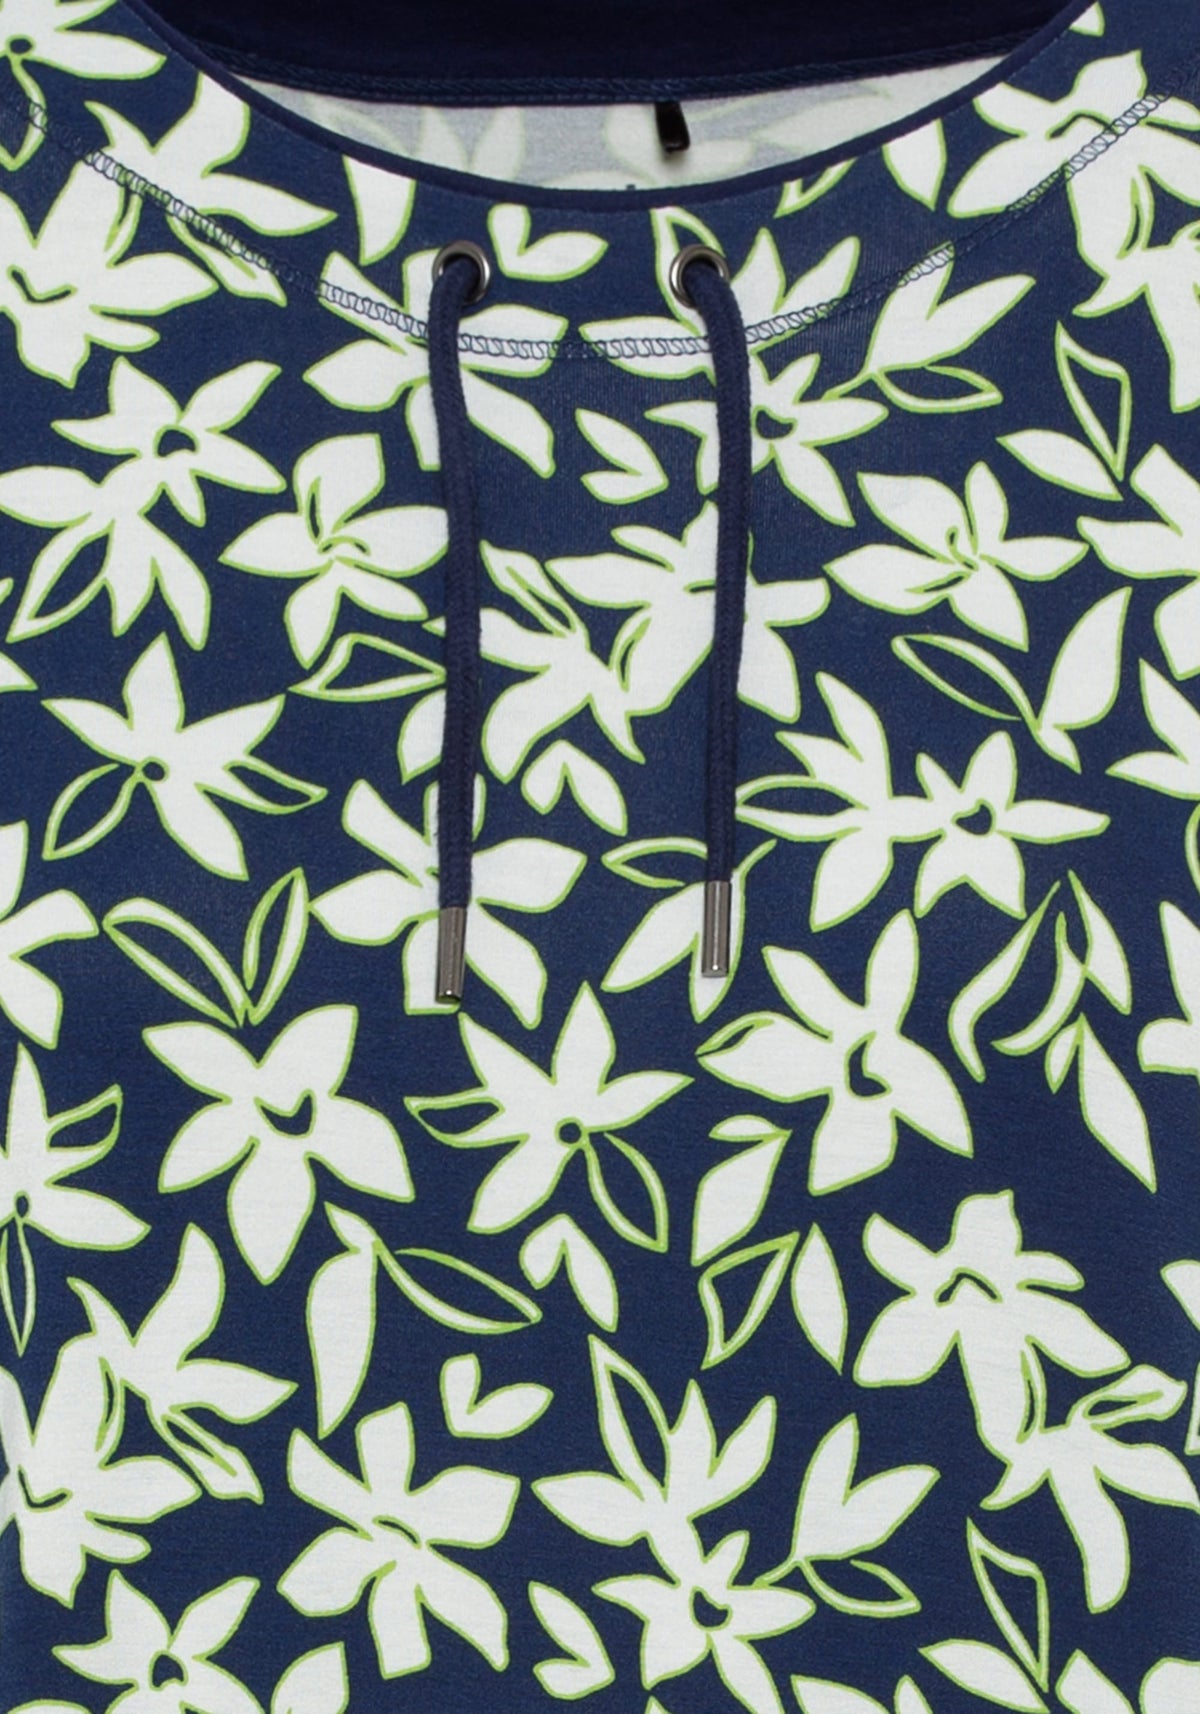 3/4 Sleeve Floral Print Tee containing LENZING™ ECOVERO™ Viscose